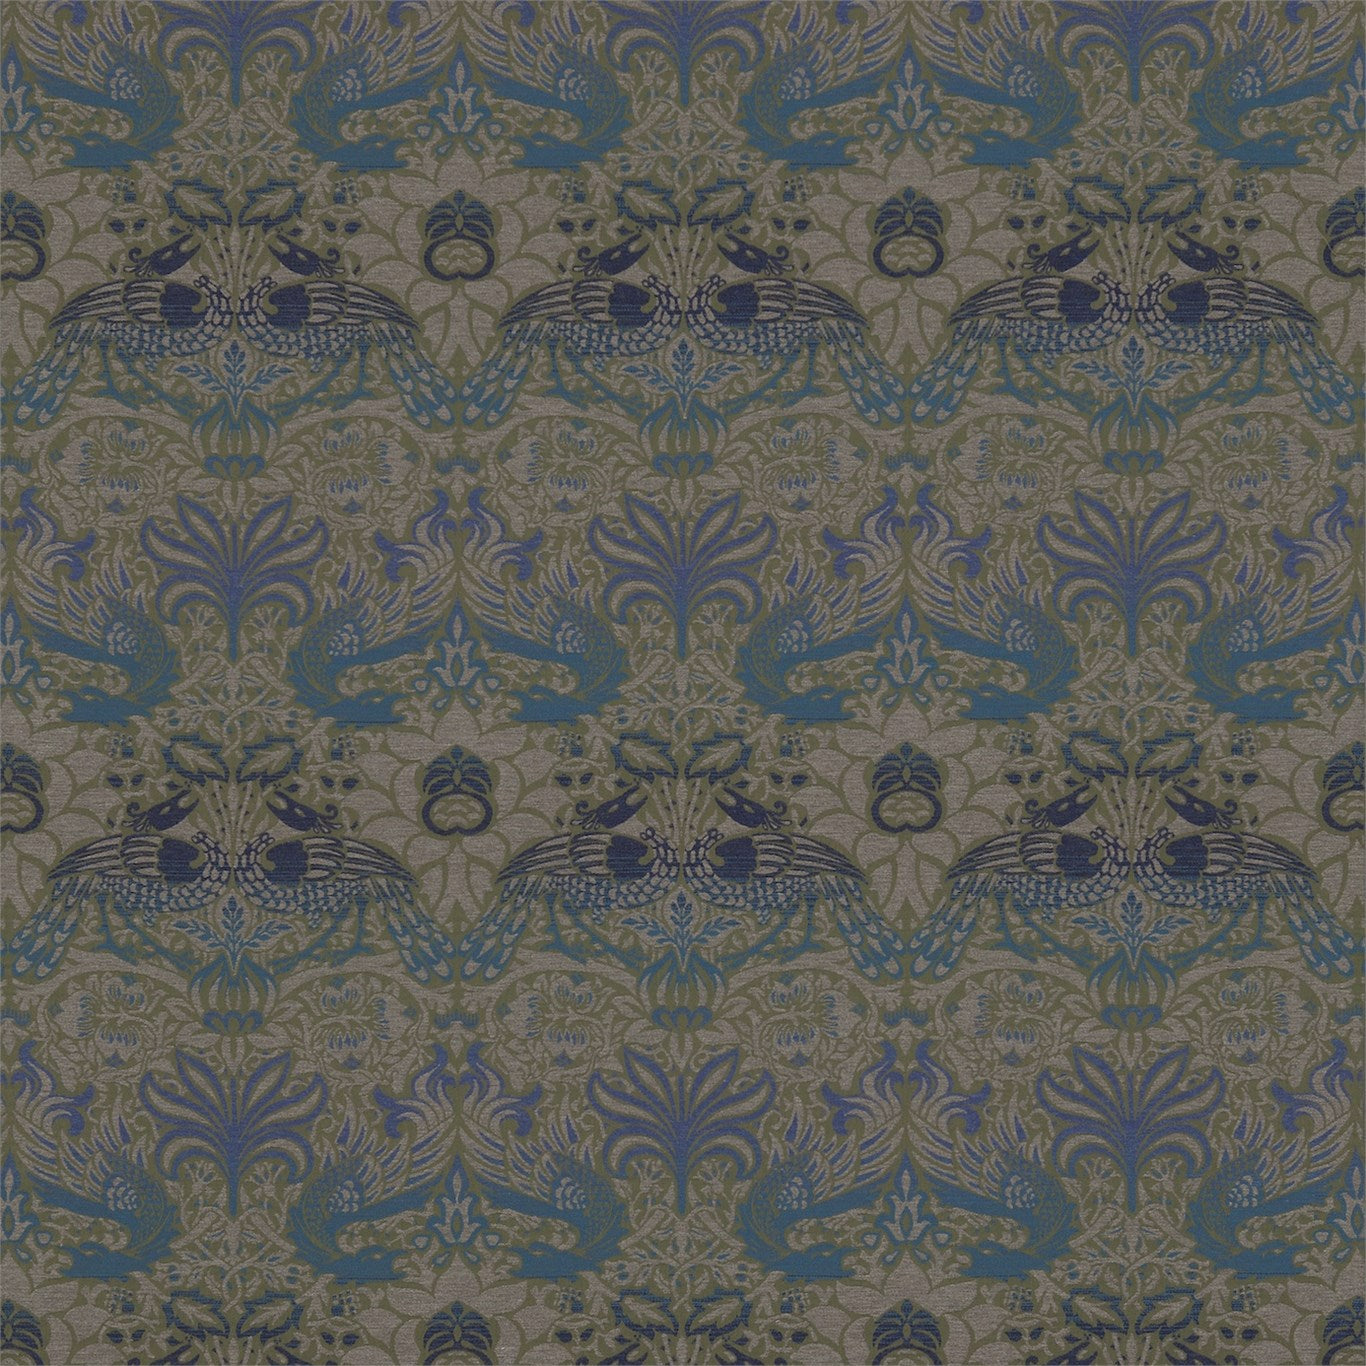 Peacock & Dragon Fabric by Morris & Co.